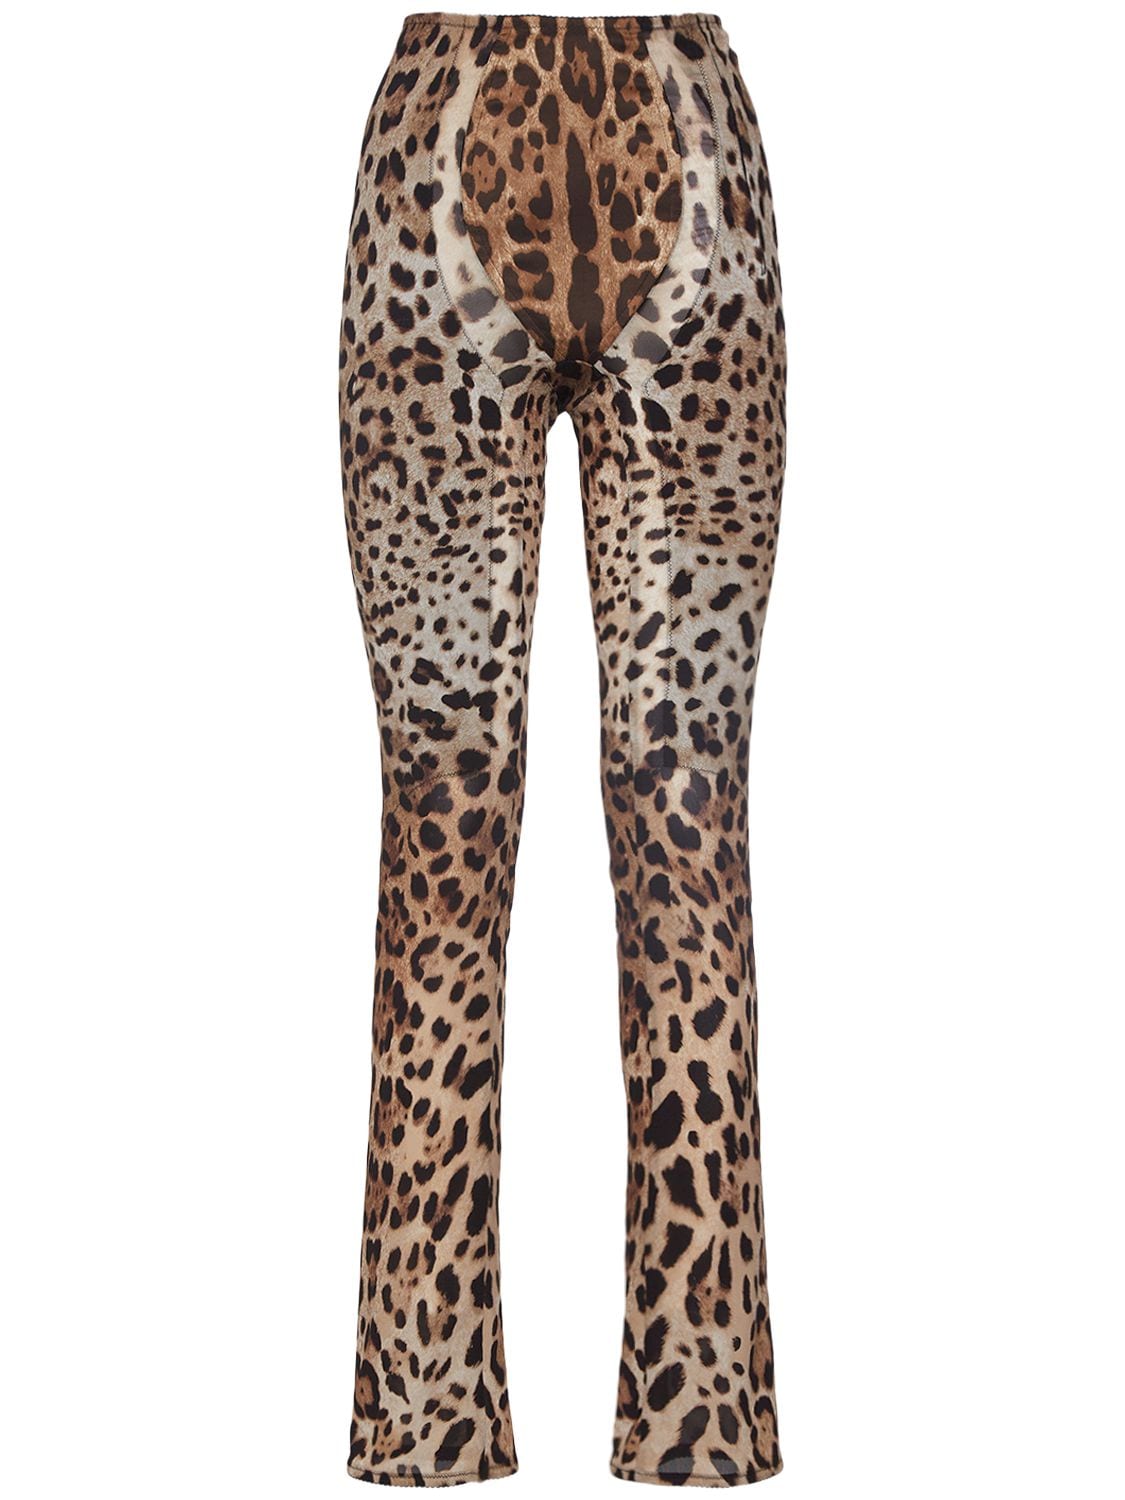 Image of Leopard Print Stretch Straight Pants